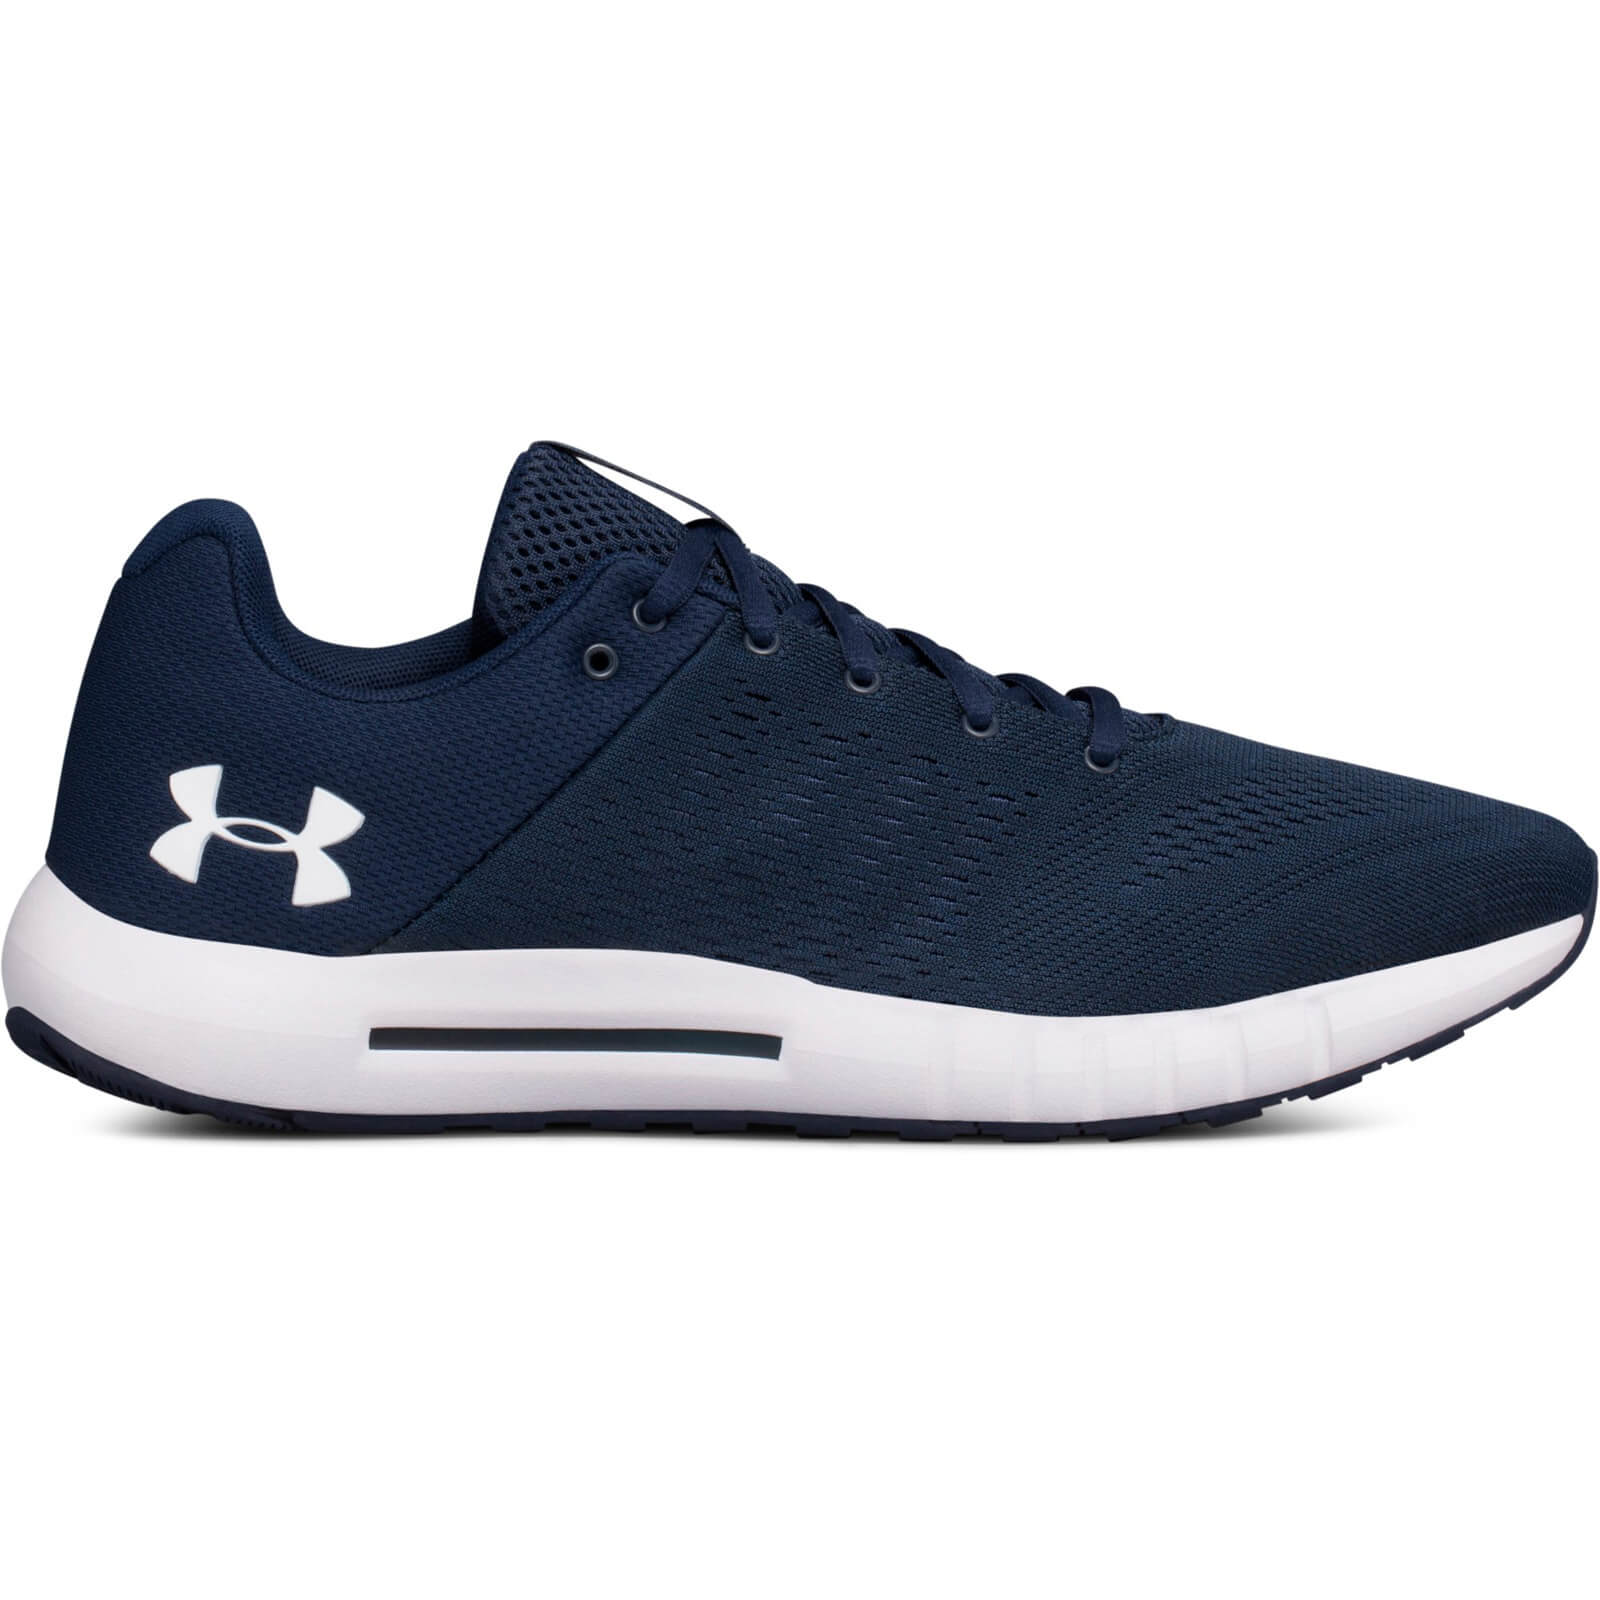 Under Armour Men's Micro G Pursuit Running Shoes - Navy | ProBikeKit UK